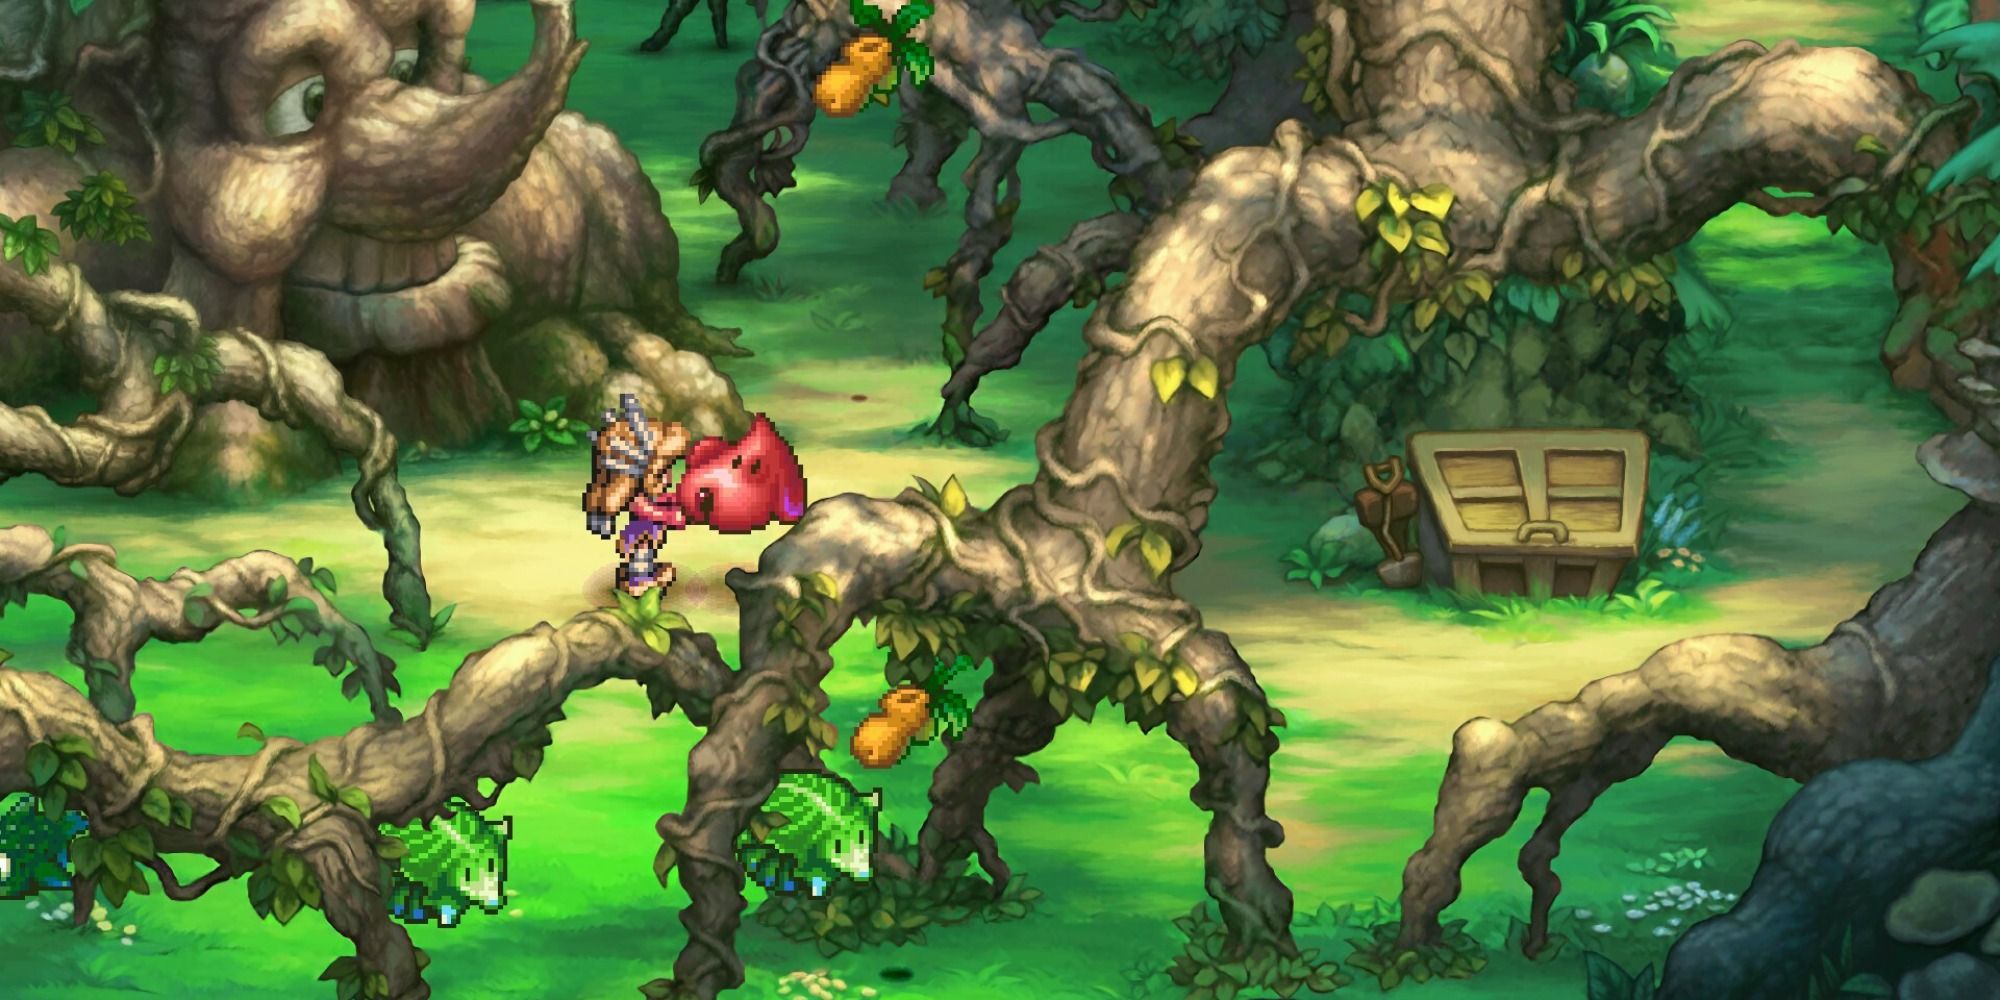 Image of the opening sequence of Trials of Mana